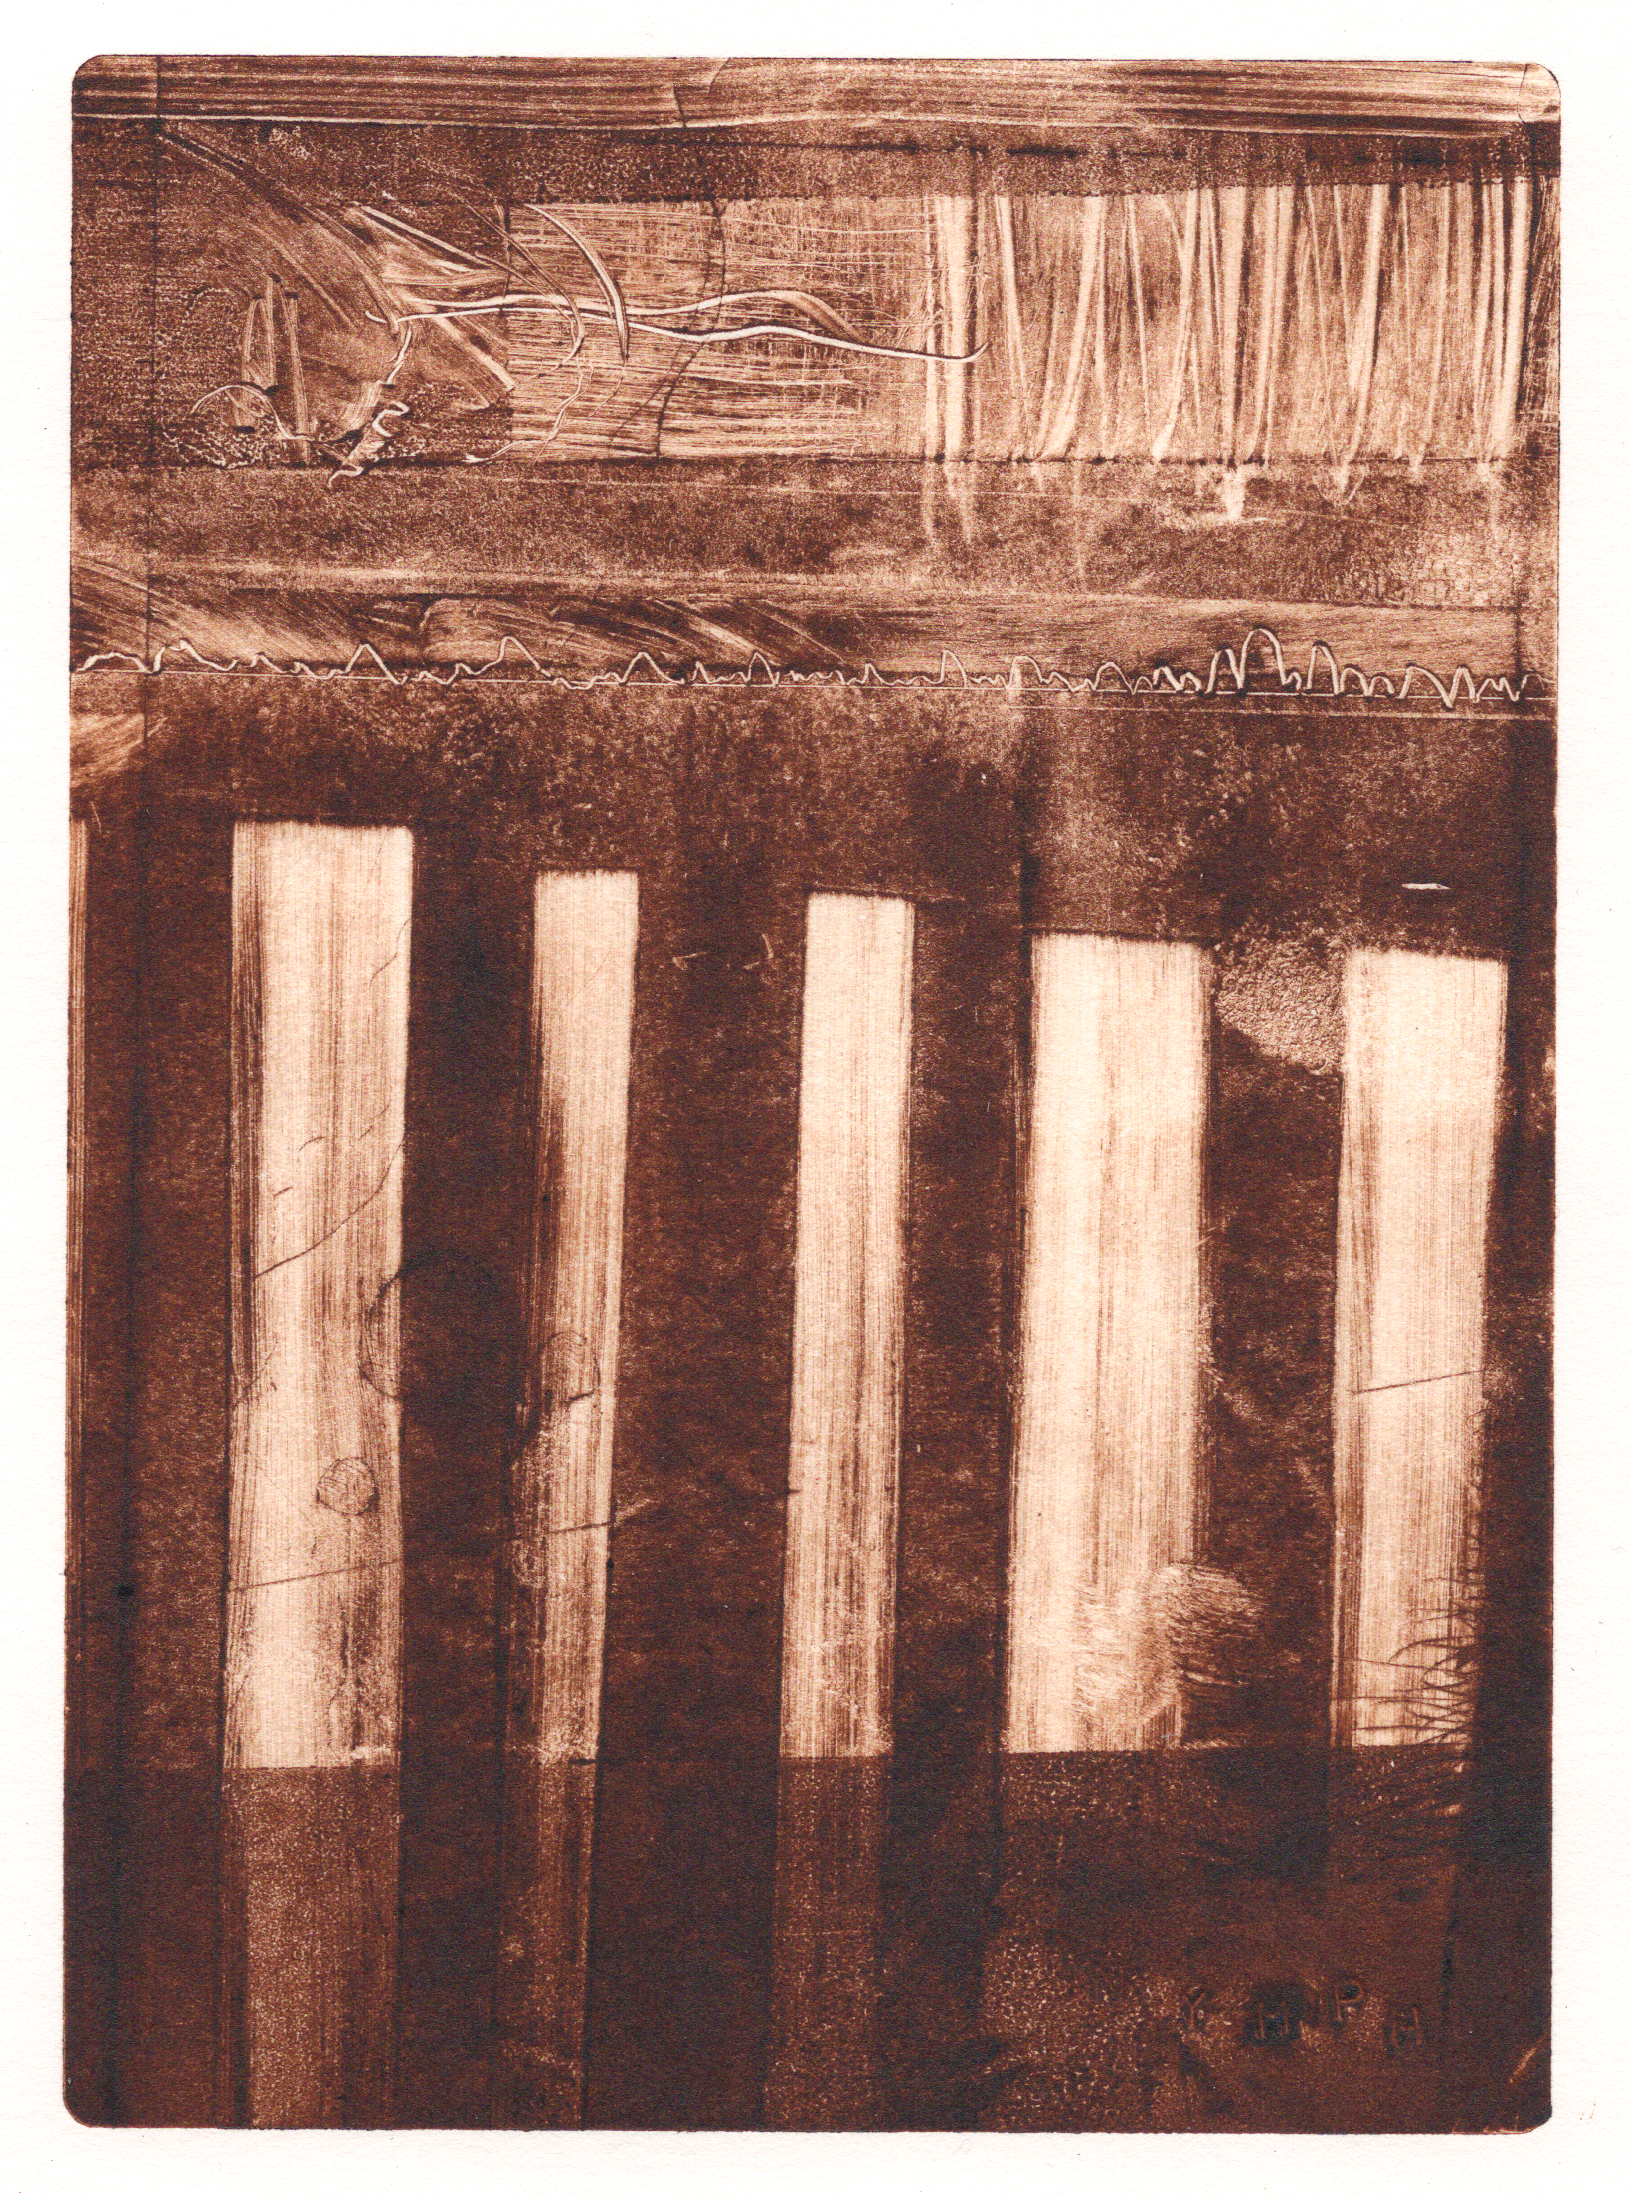  A monotype print by Clive Knights experimenting with umber ink on paper&nbsp; 